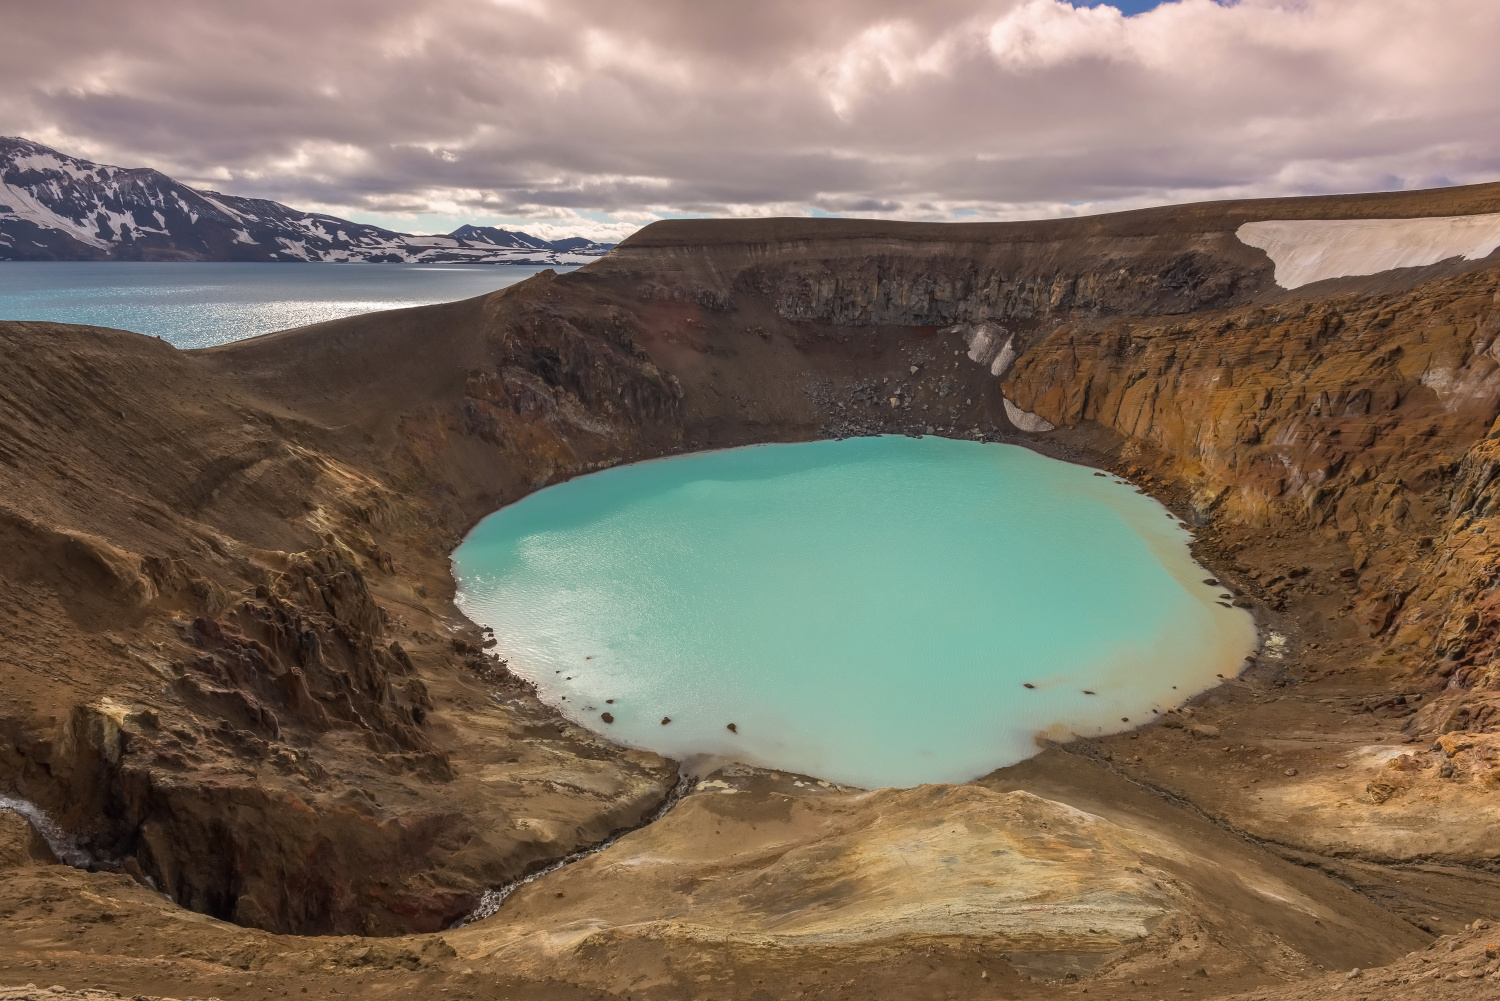 Askja is the volcanic crater in Iceland